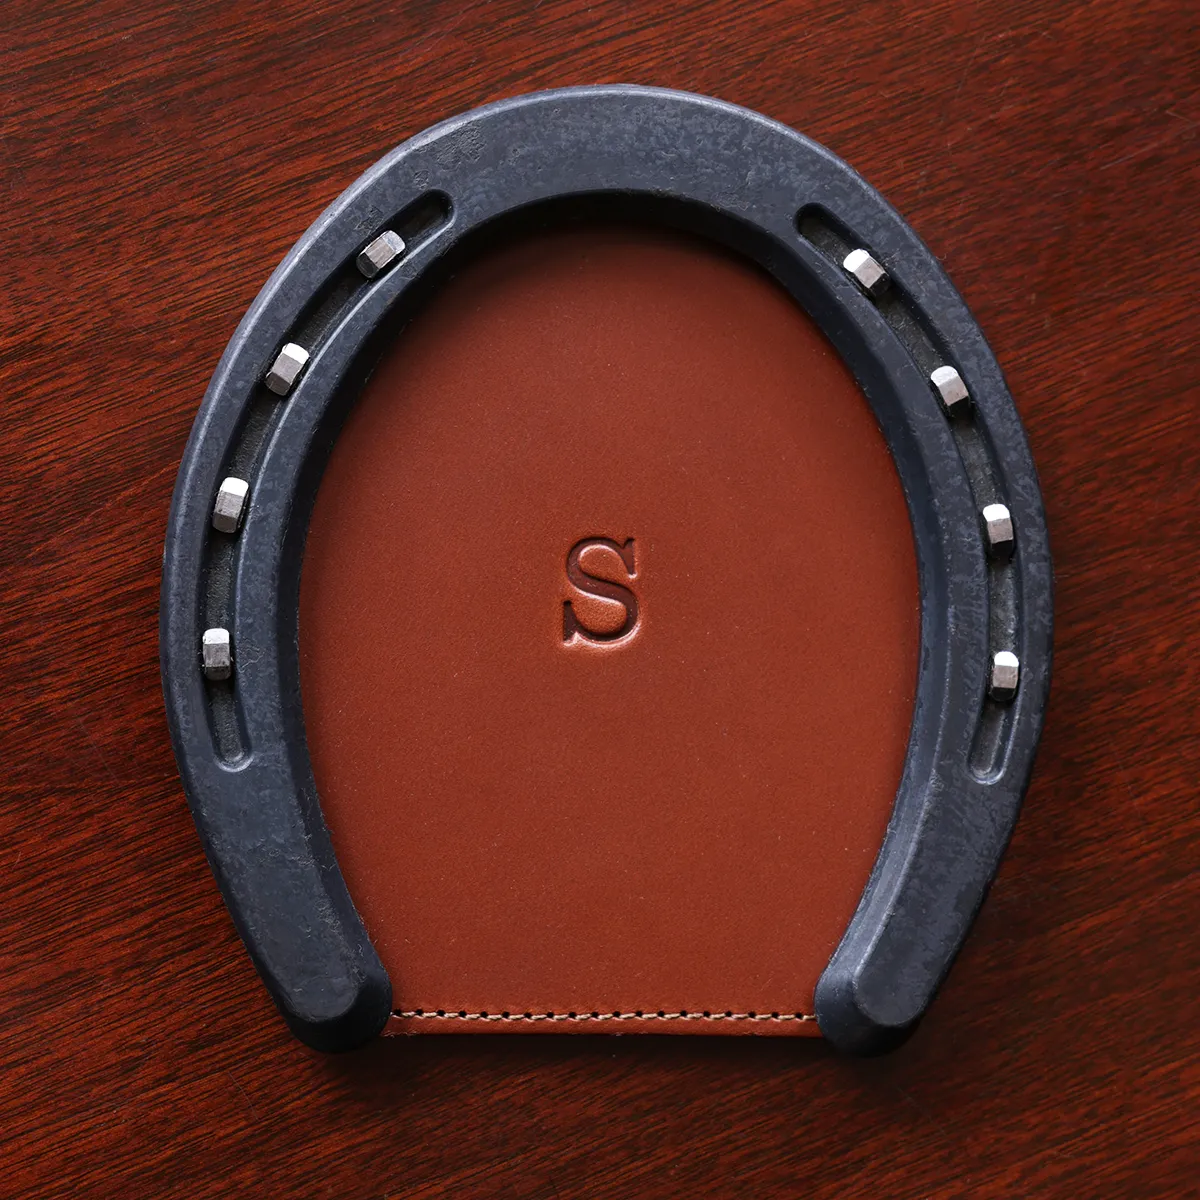 leather horseshoe coaster with personalization initial stamp on wooden table